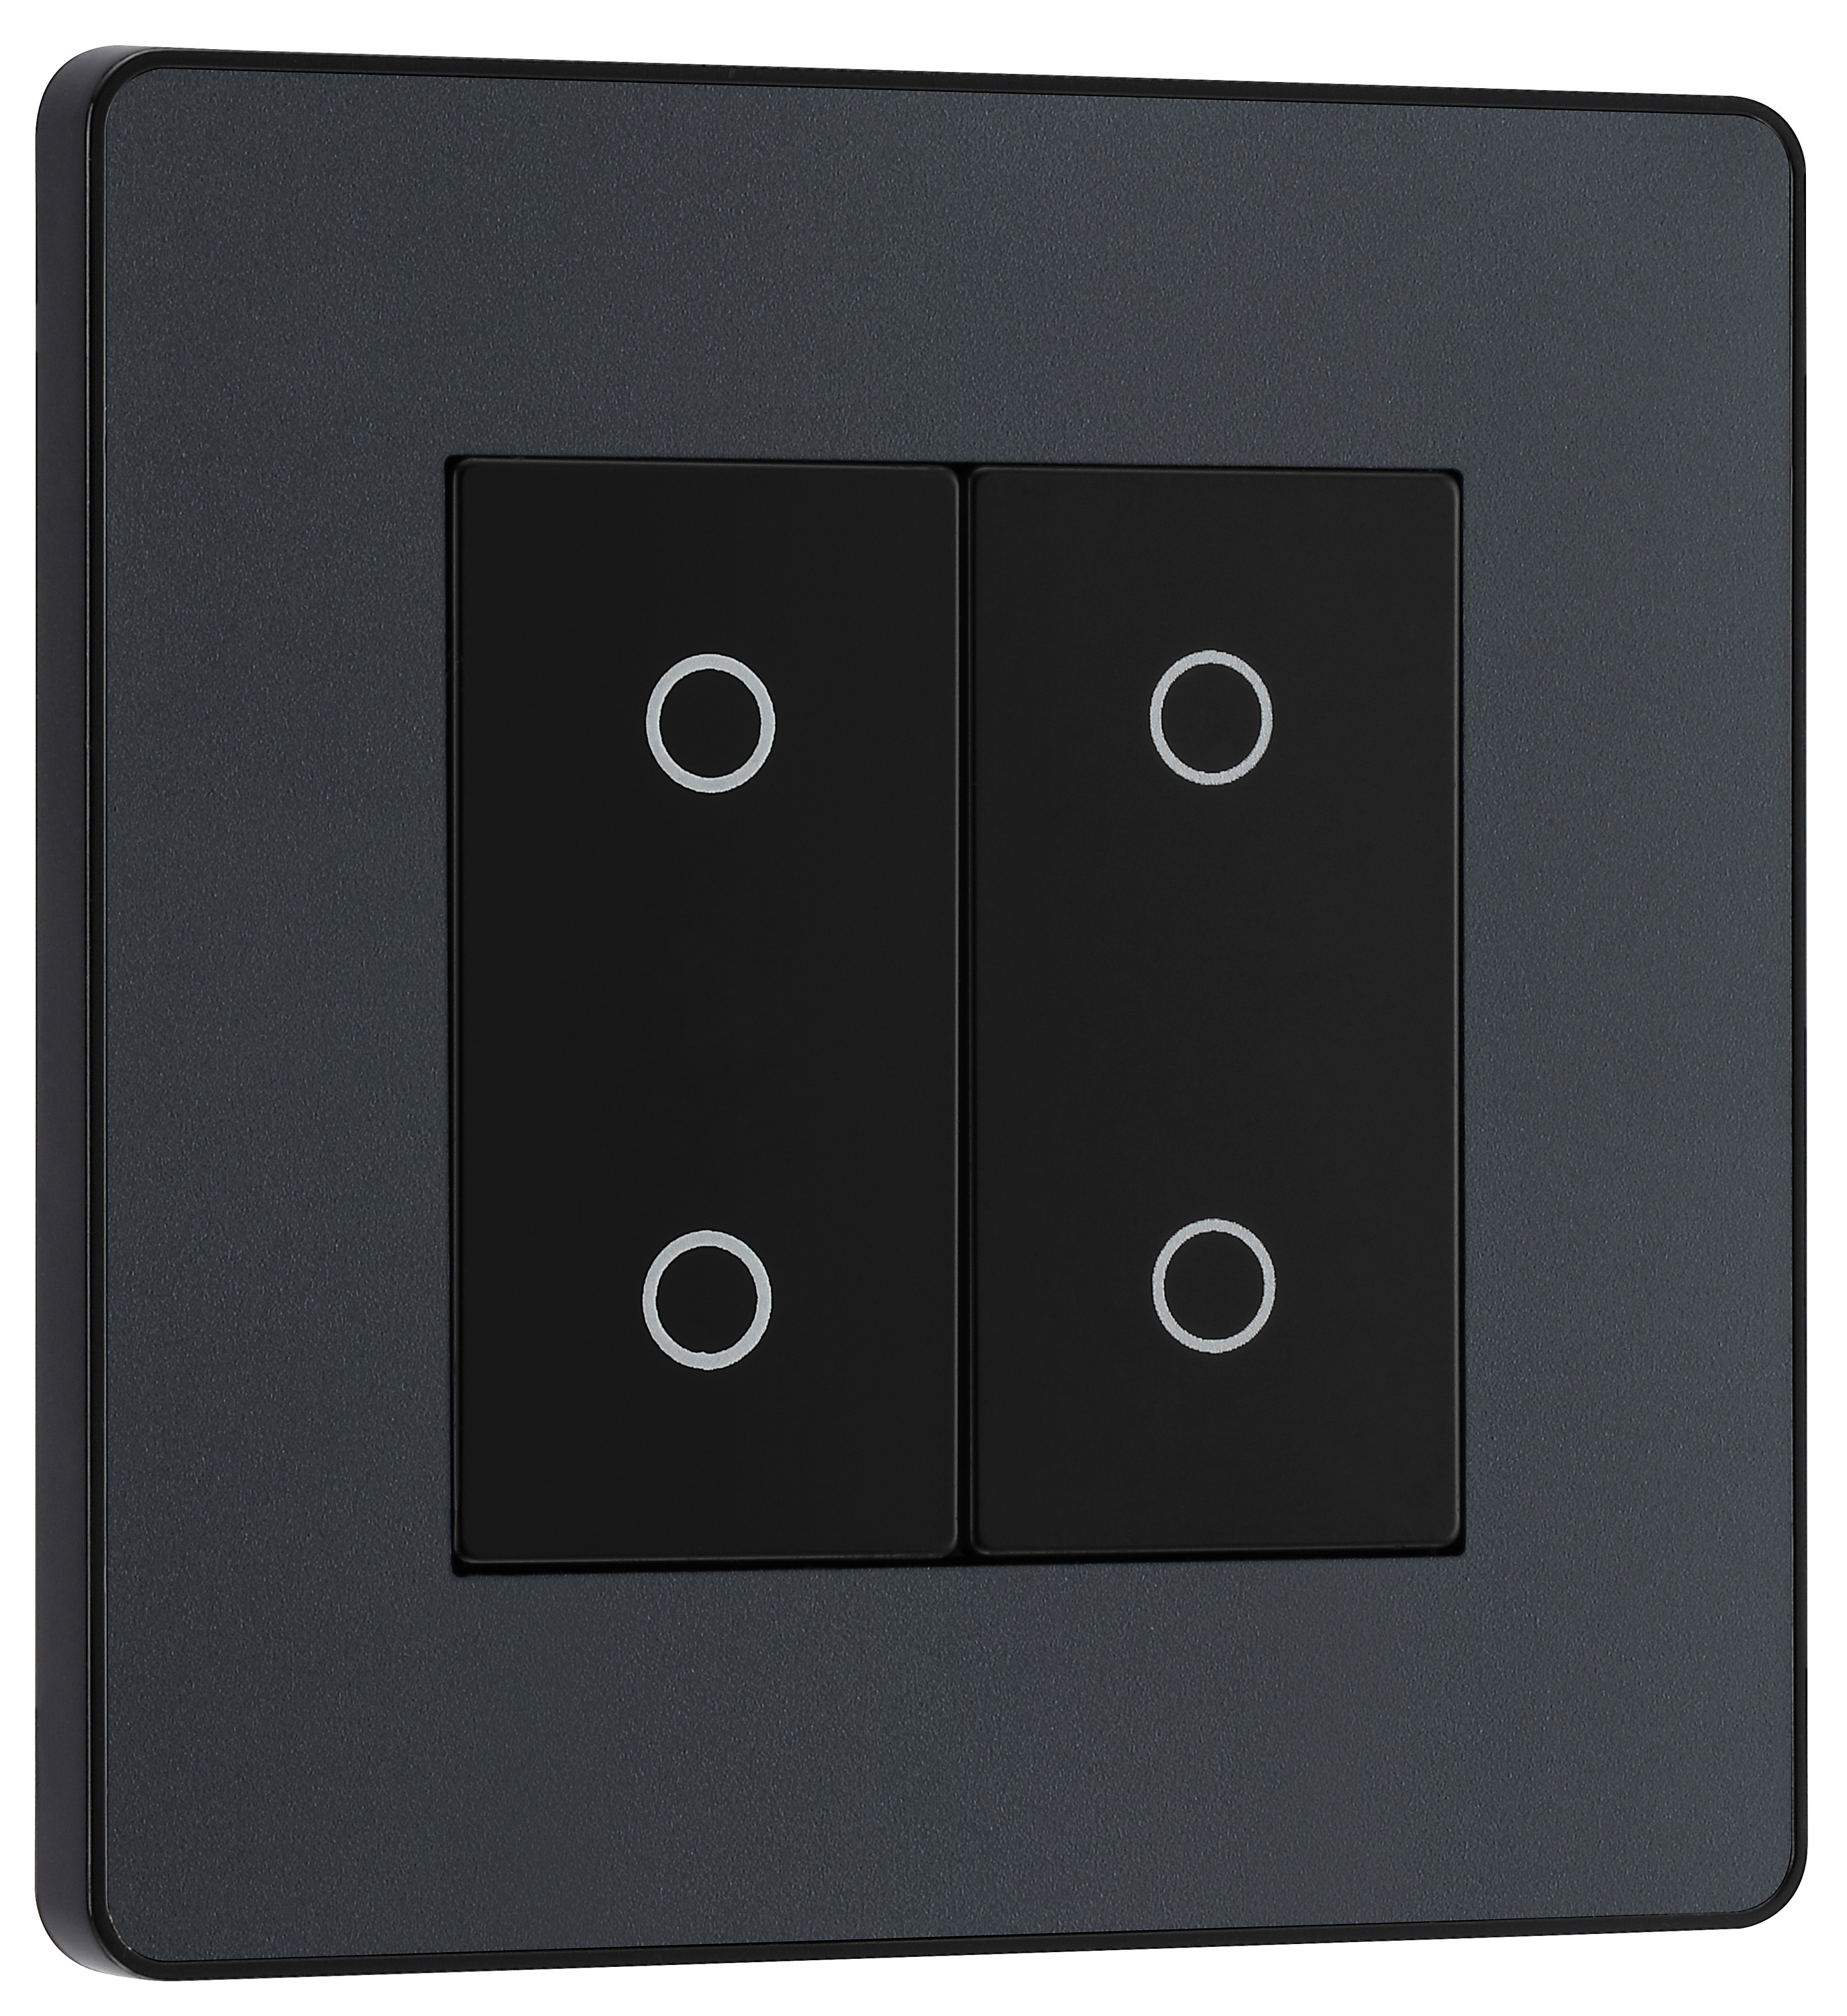 Image of BG Evolve Secondary Matt Grey 2 Way Double Touch Dimmer Switch - 200W